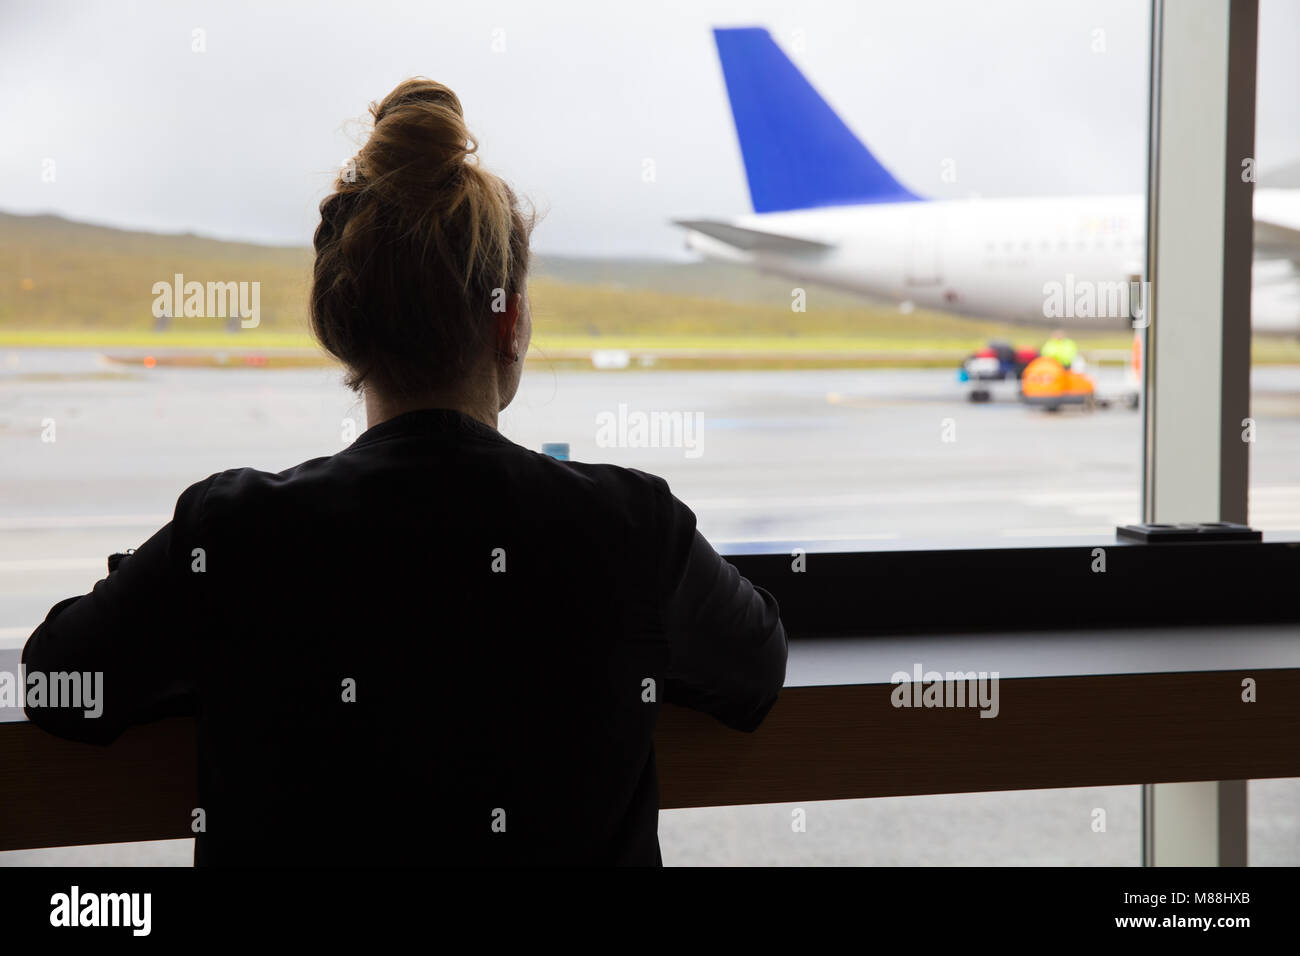 Woman Looking At Airplane Through Window At Airport Stock Photo